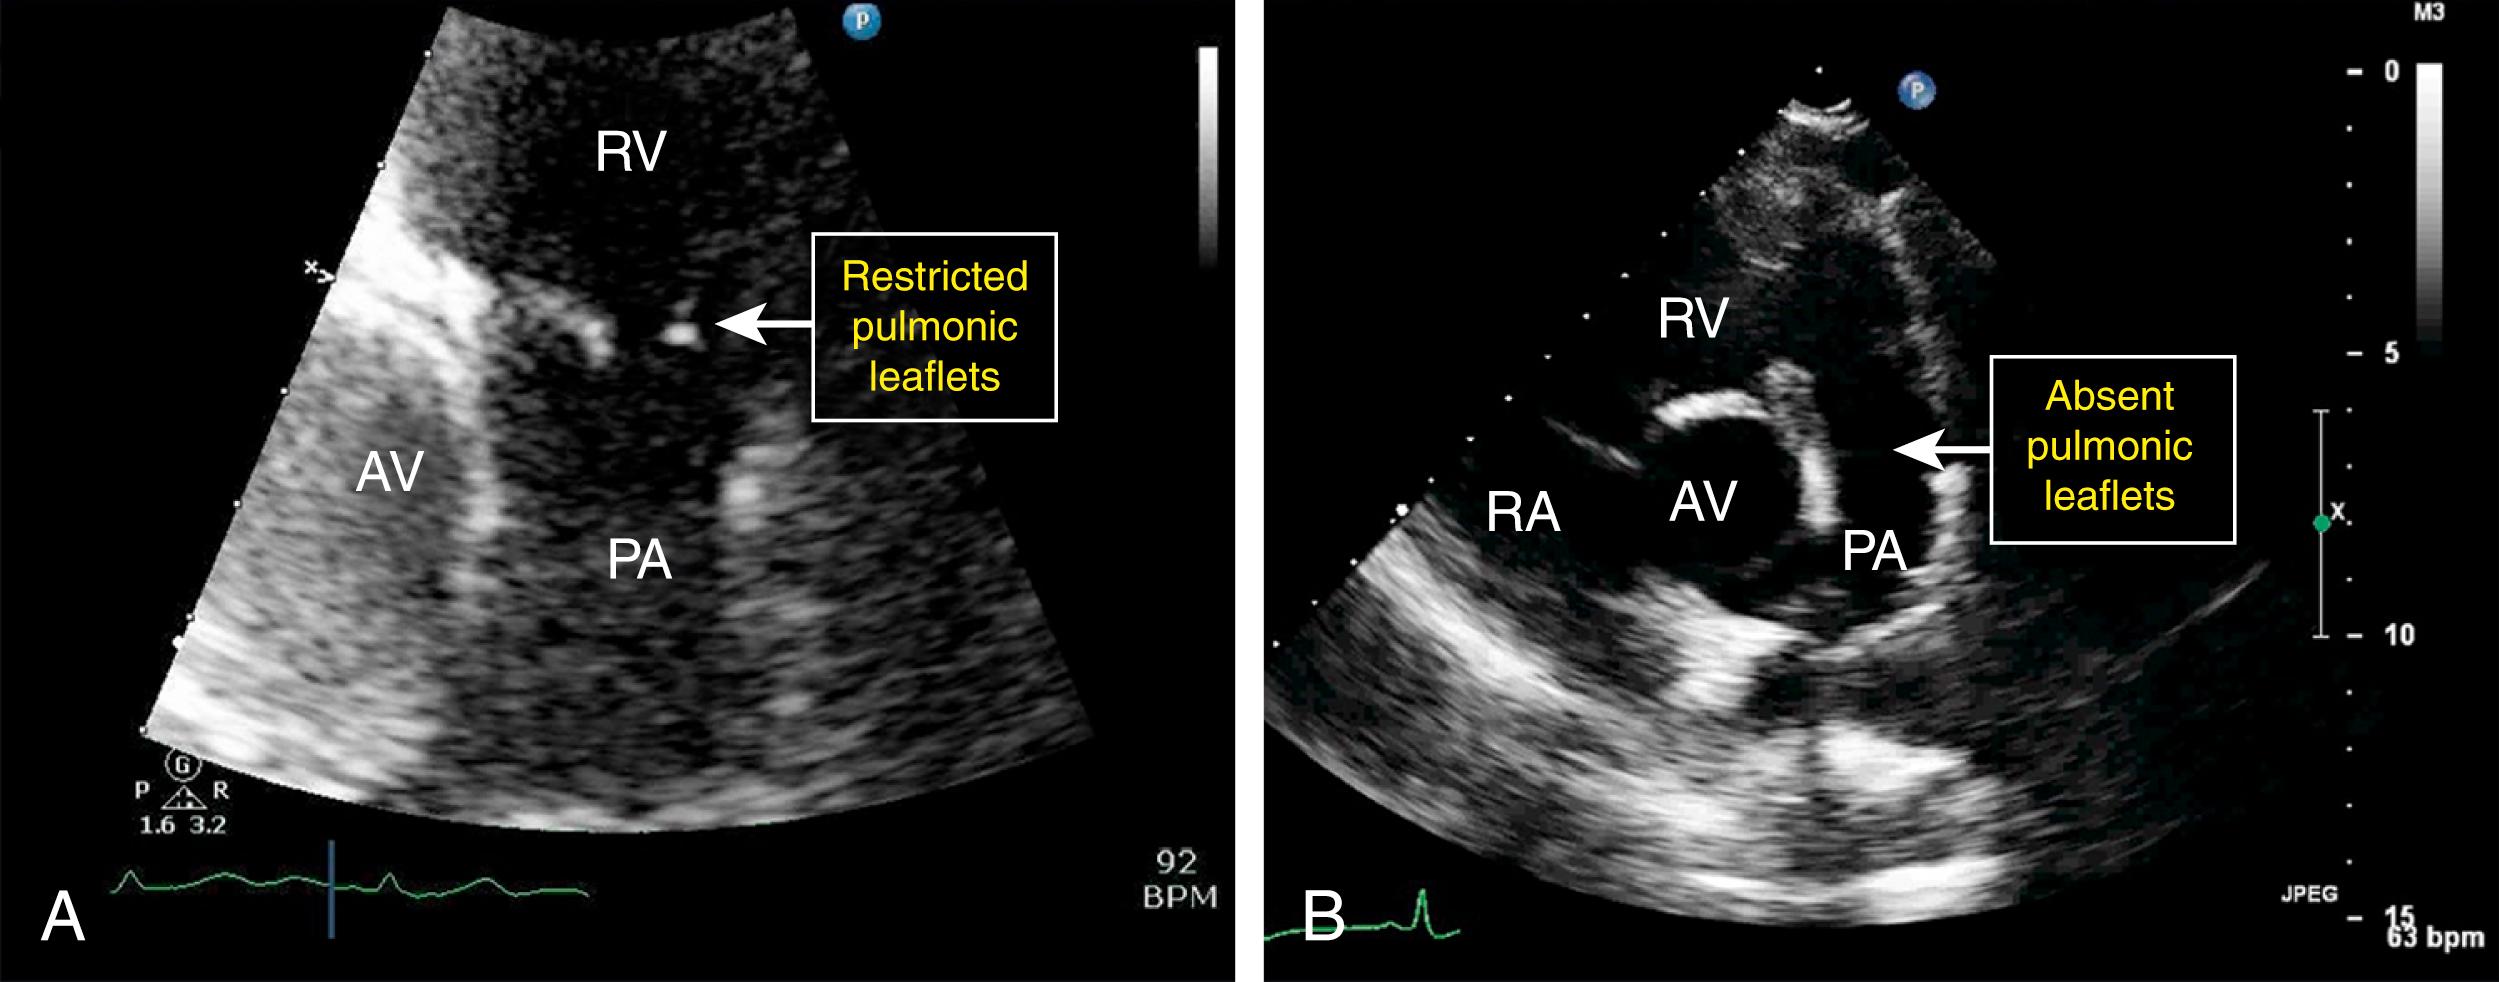 Figure 107.3, Causes of severe pulmonic regurgitation (PR). A, Carcinoid disease of the pulmonic valve. B, Severe PR occurring decades after surgical repair of tetralogy of Fallot. AV, Aortic valve; PA, pulmonary artery; RA, right atrium; RV, right ventricle. (See accompanying Video 107.3A , Video 107.3B .)